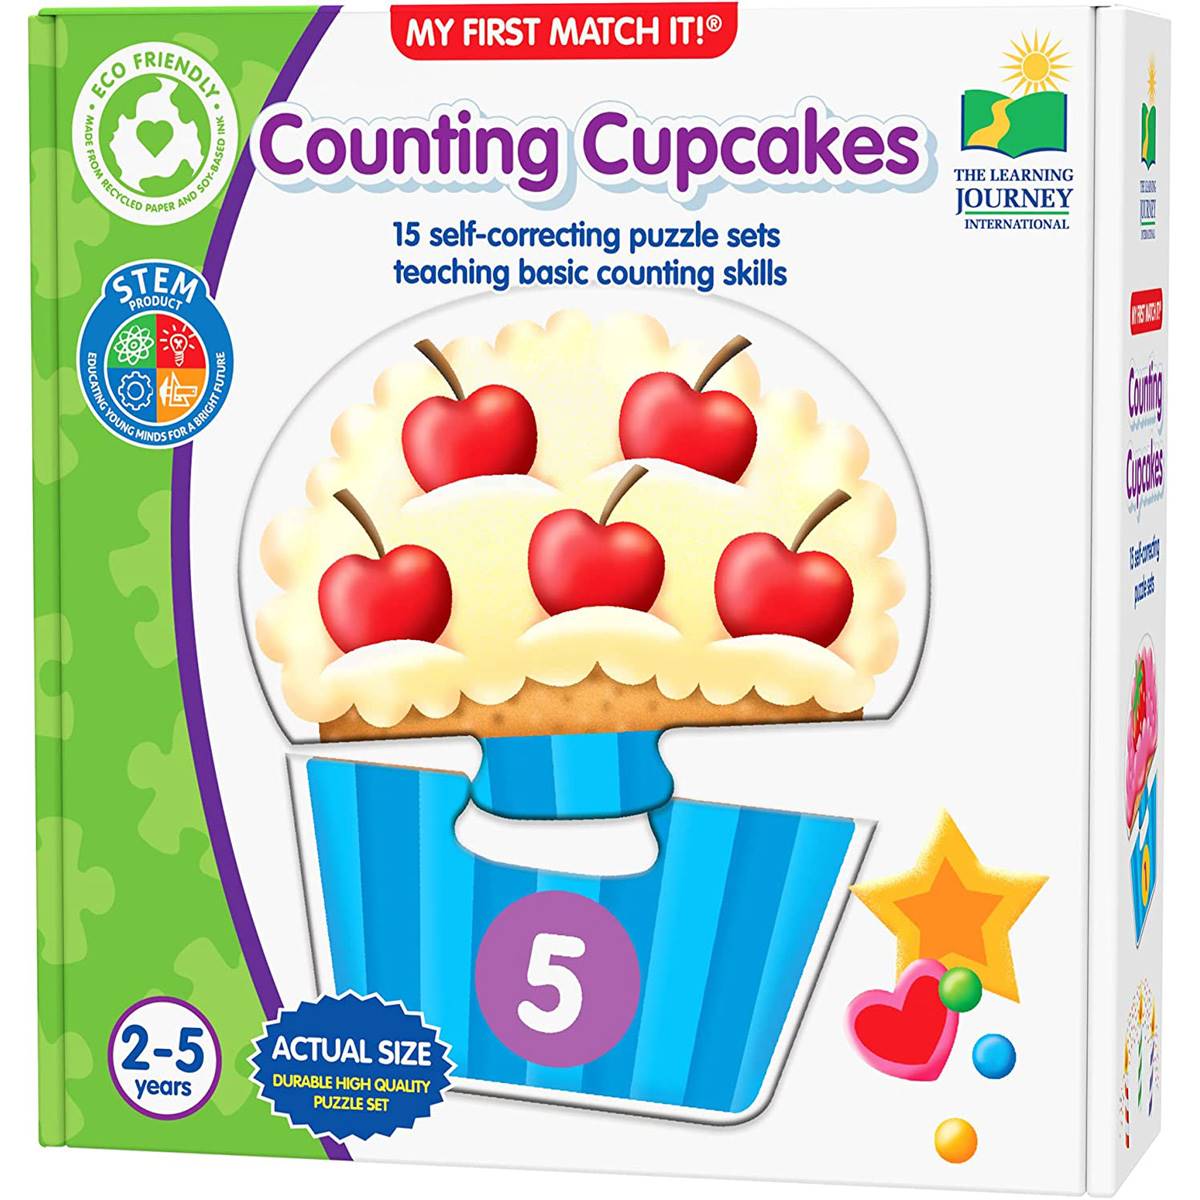 The Learning Journey My First Match It(R) - Counting Cupcakes